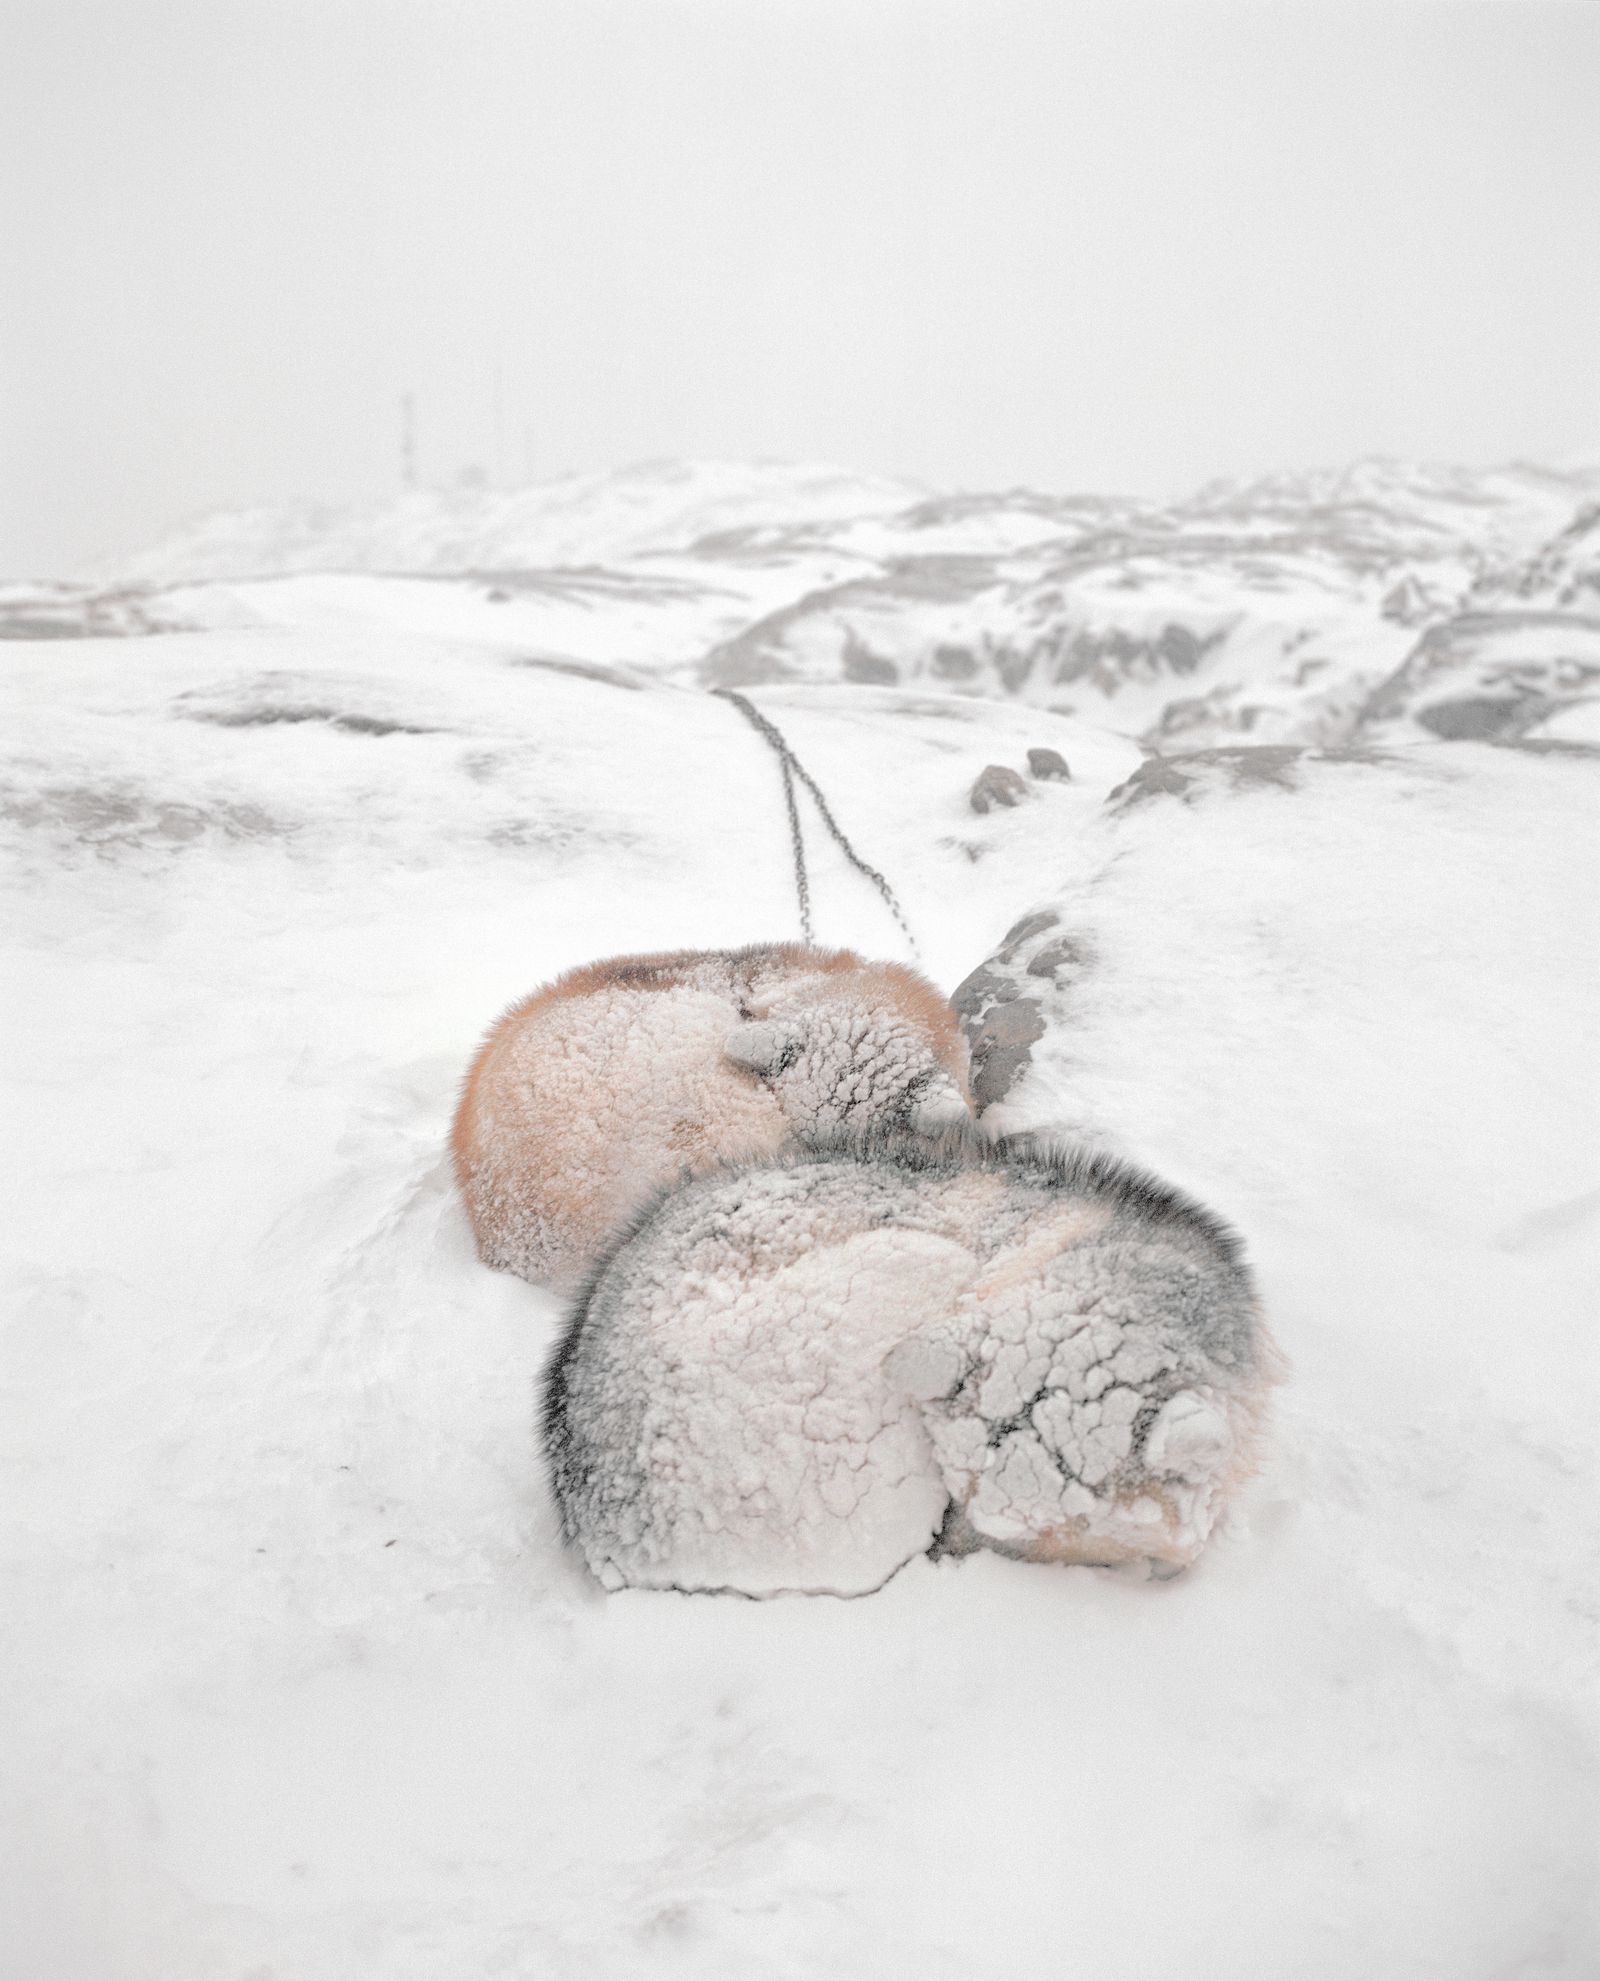 © Lukas Kreibig - Image from the Heart of a Seal photography project